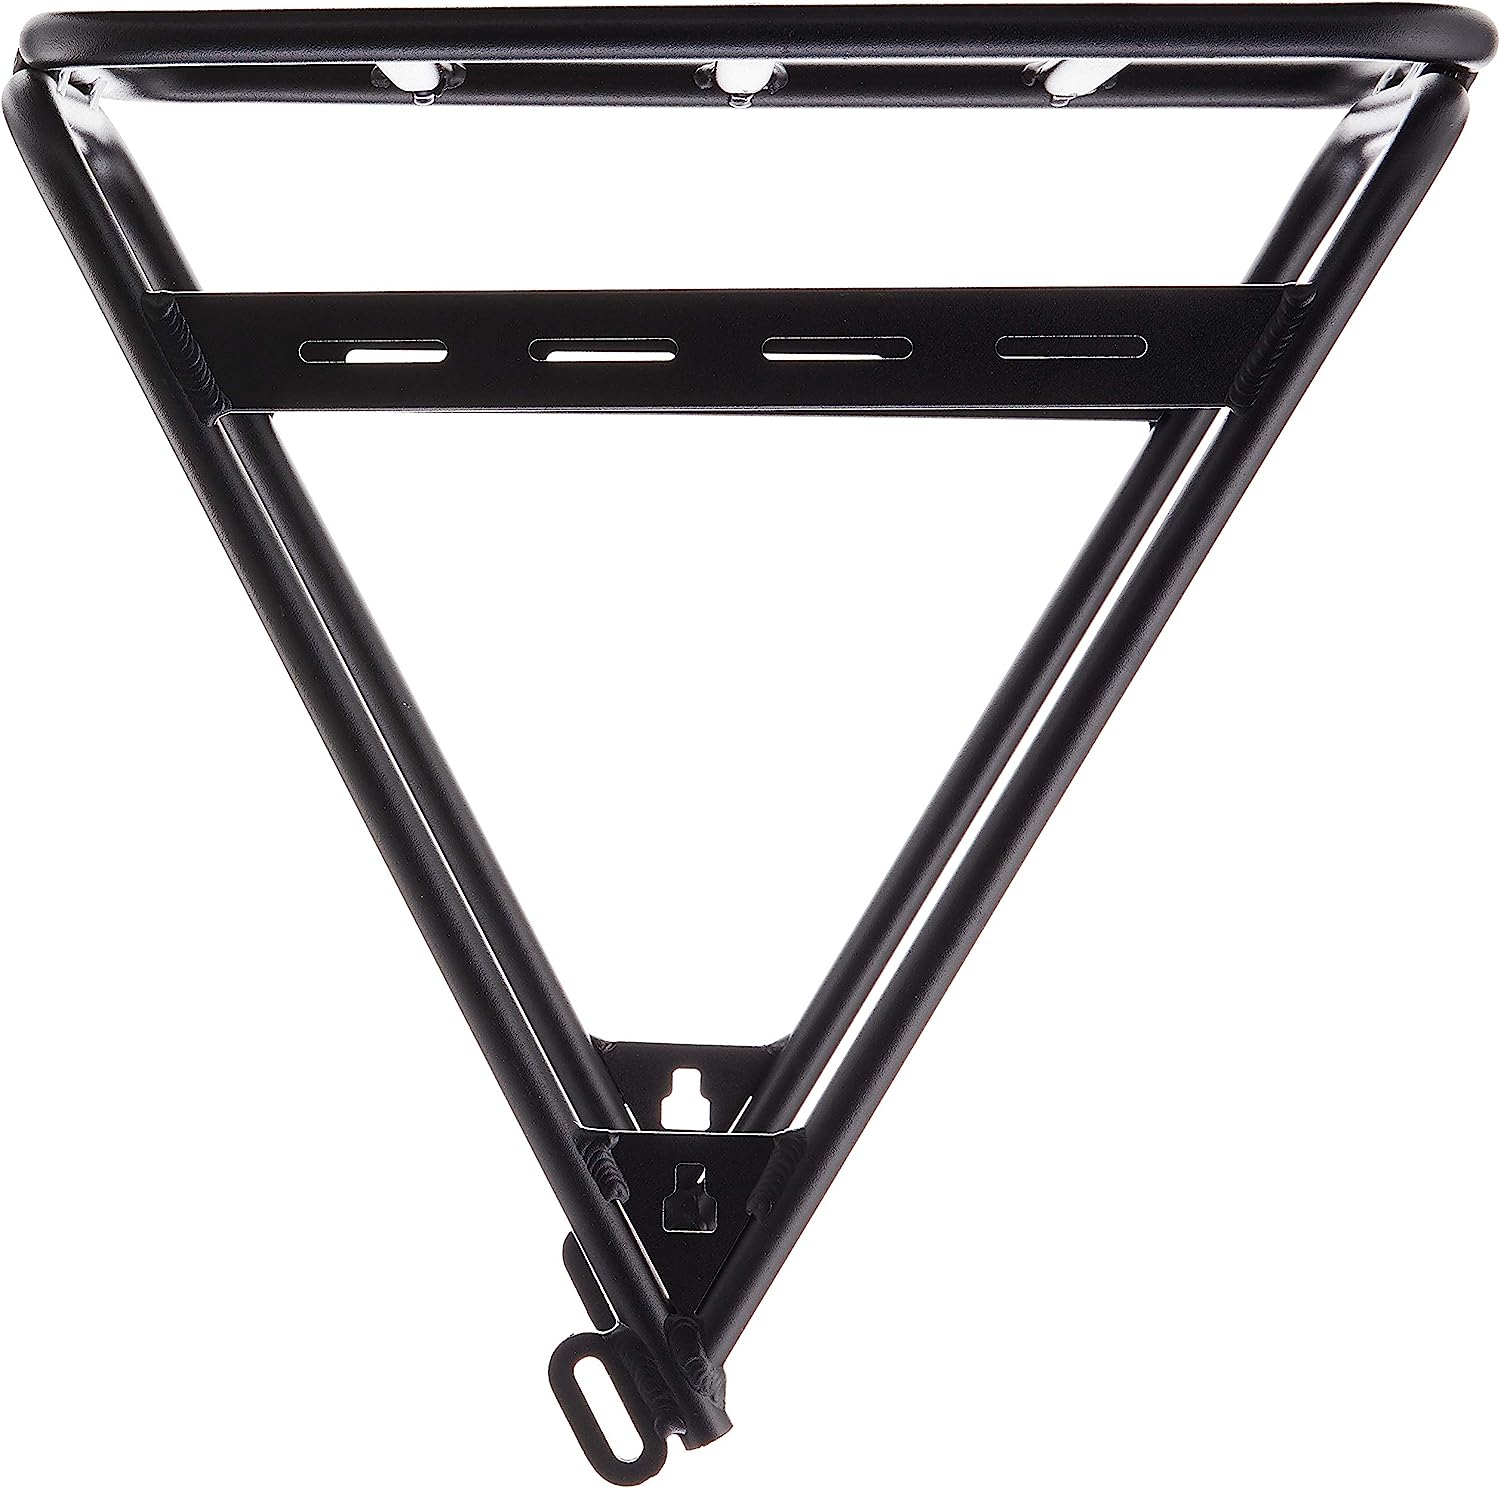 Rambo Bikes Front Luggage Gear Rack Review